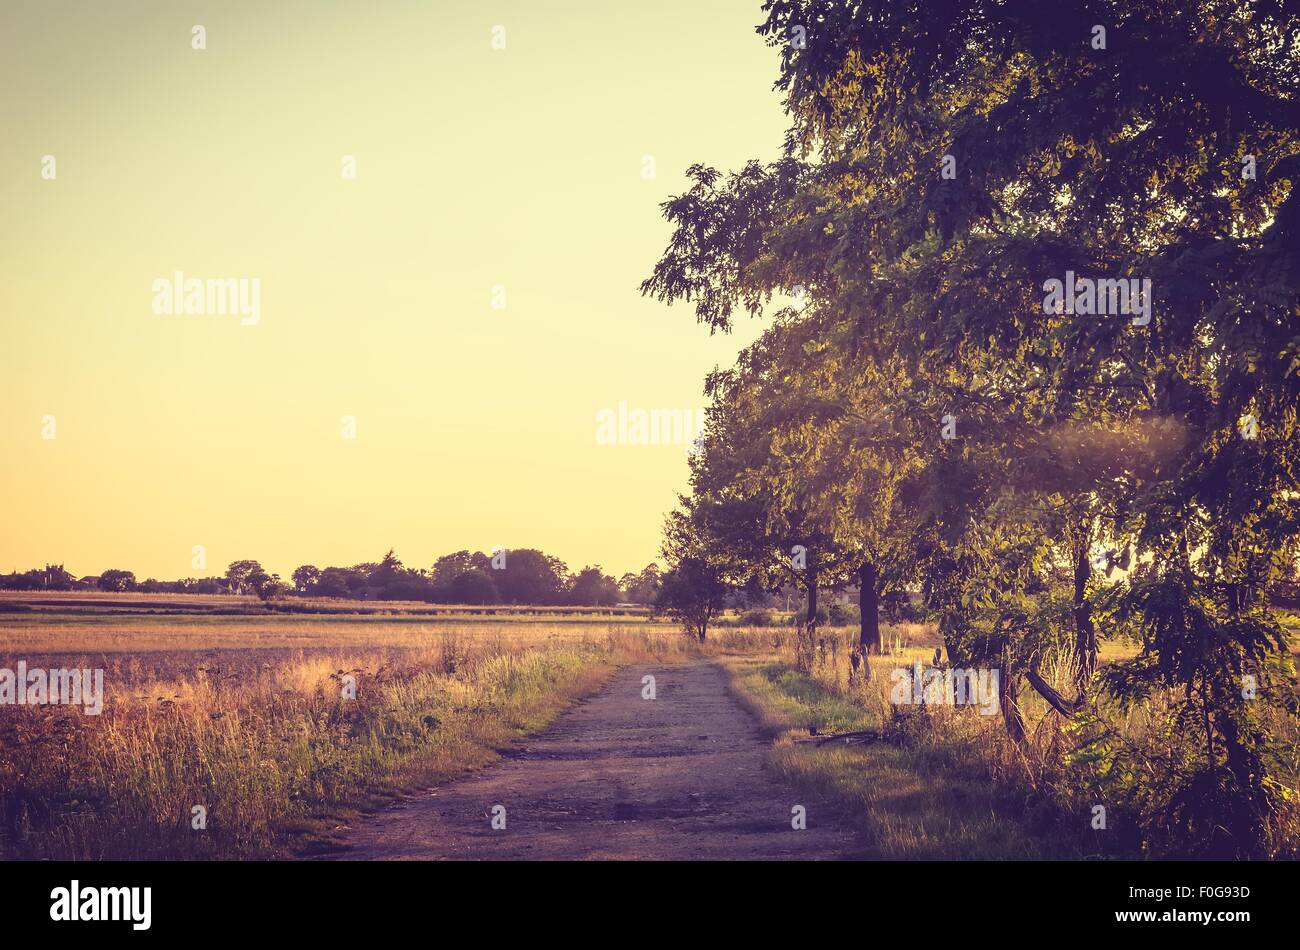 Vintage summer landscape. Rural road and trees at sunset. Stock Photo